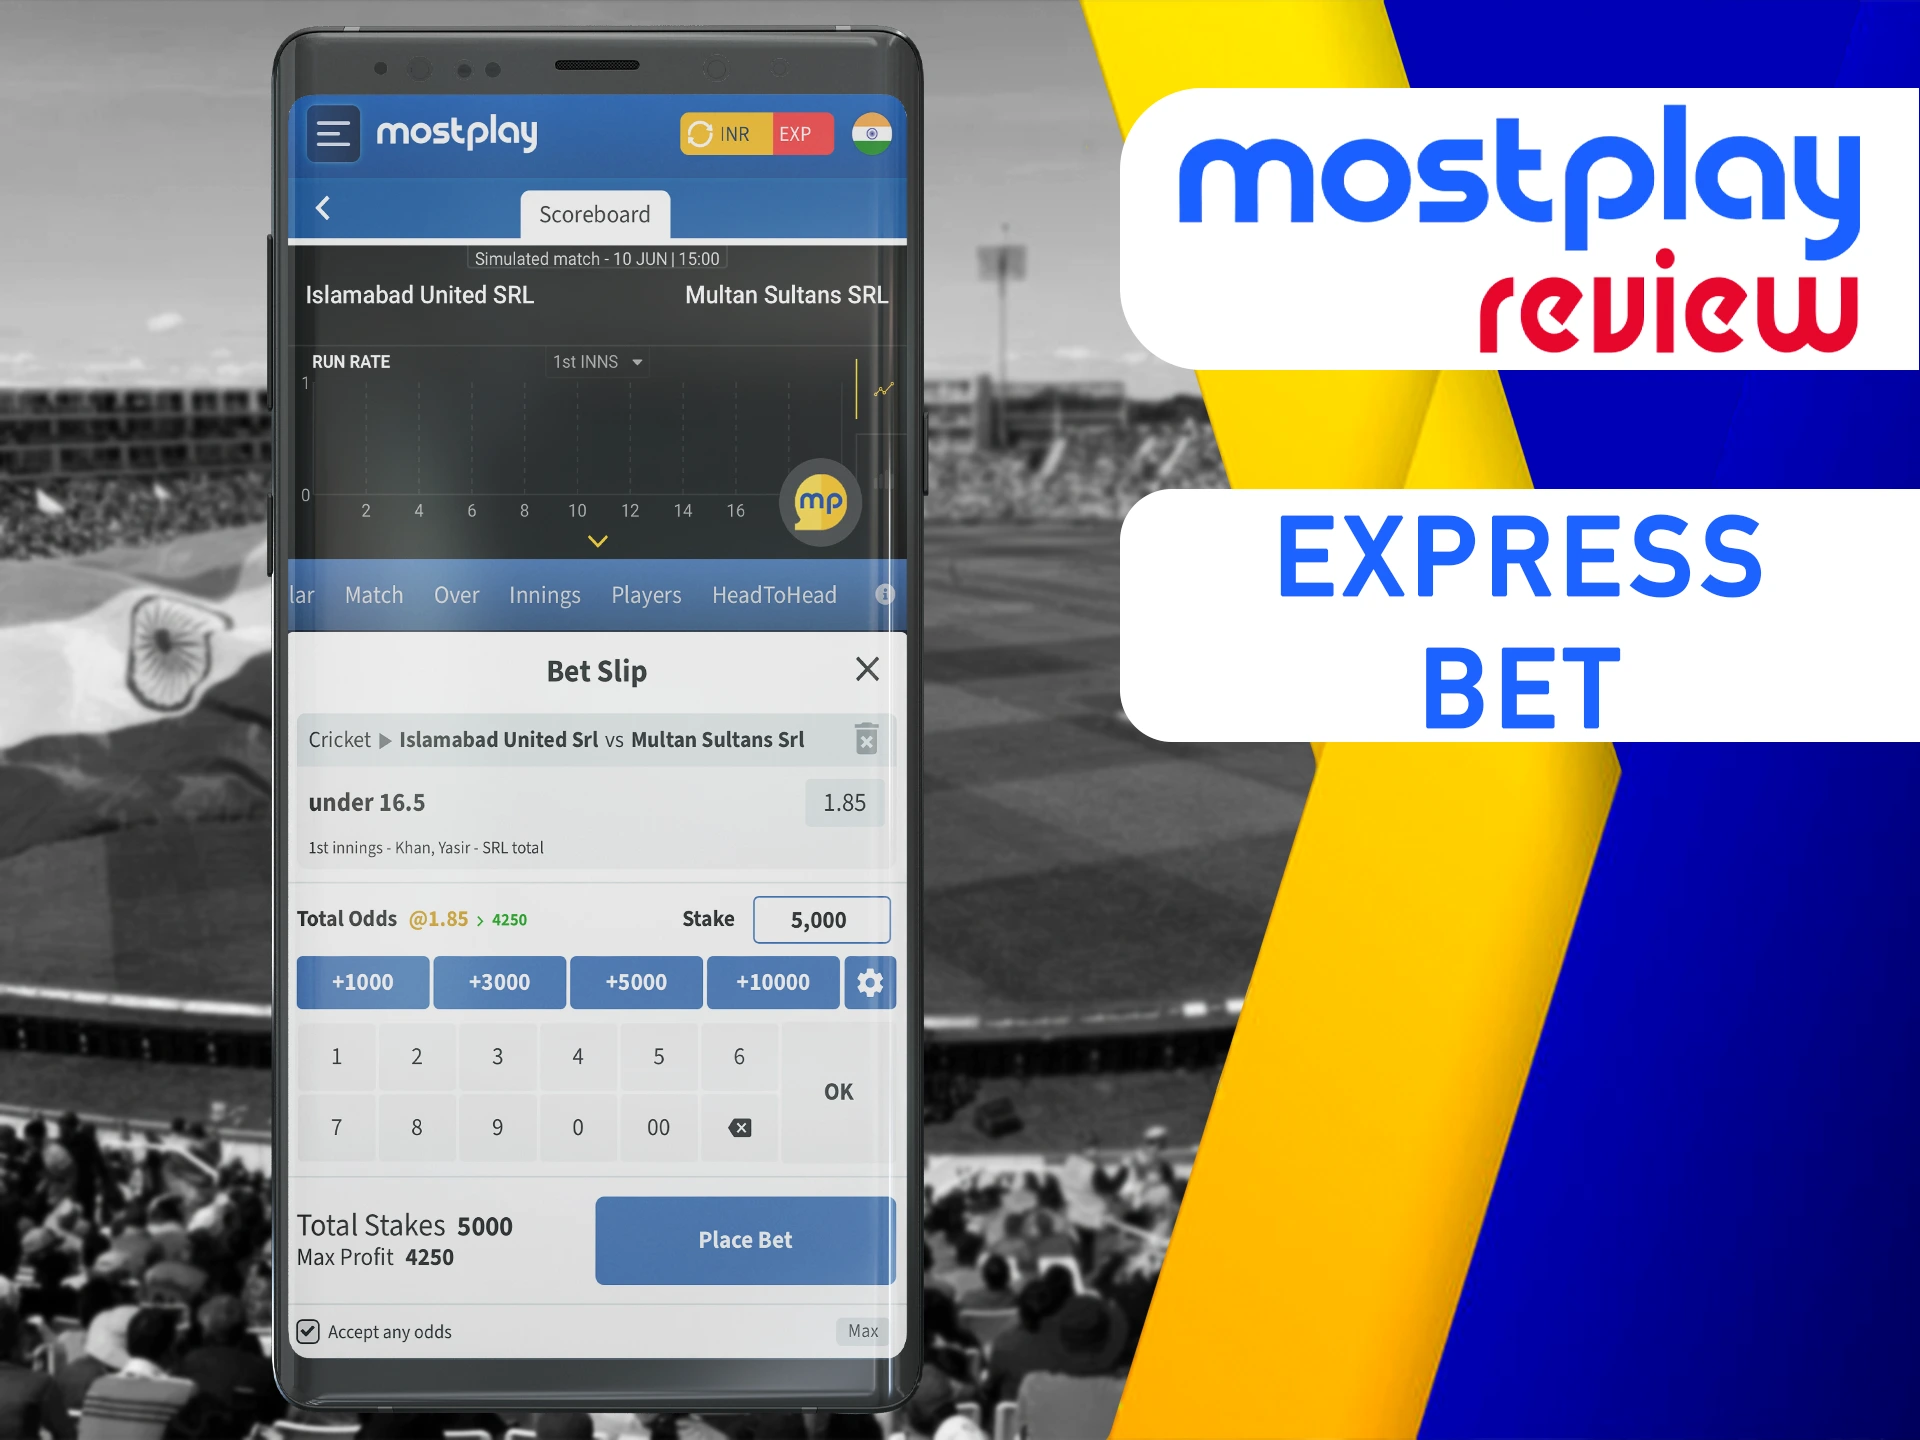 Make difficult bets at Mostplay and win more money.